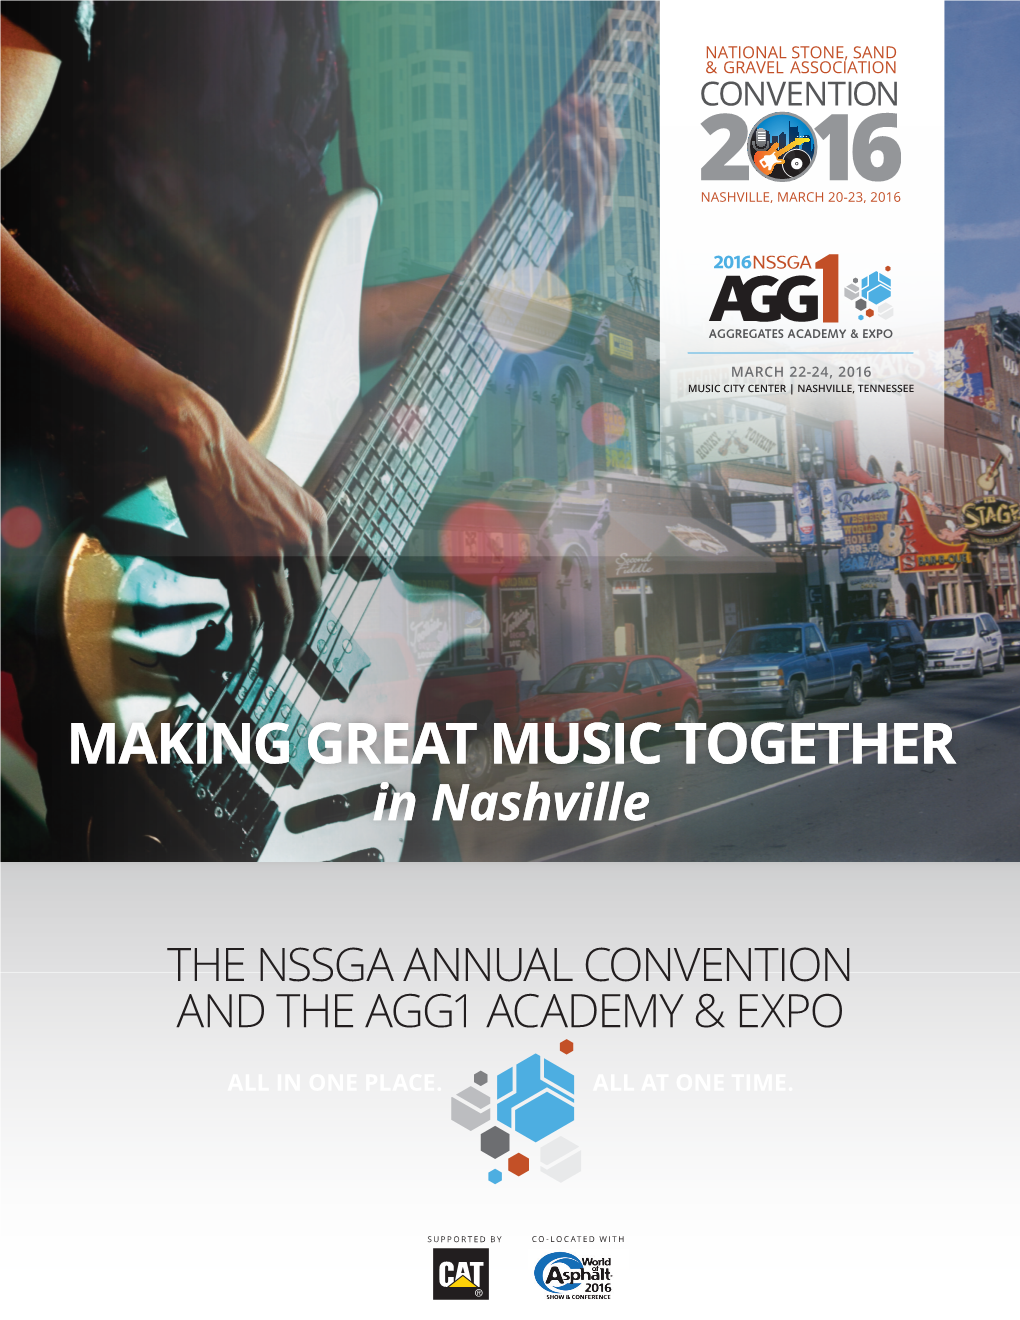 Nssga Annual Convention and the Agg1 Academy & Expo